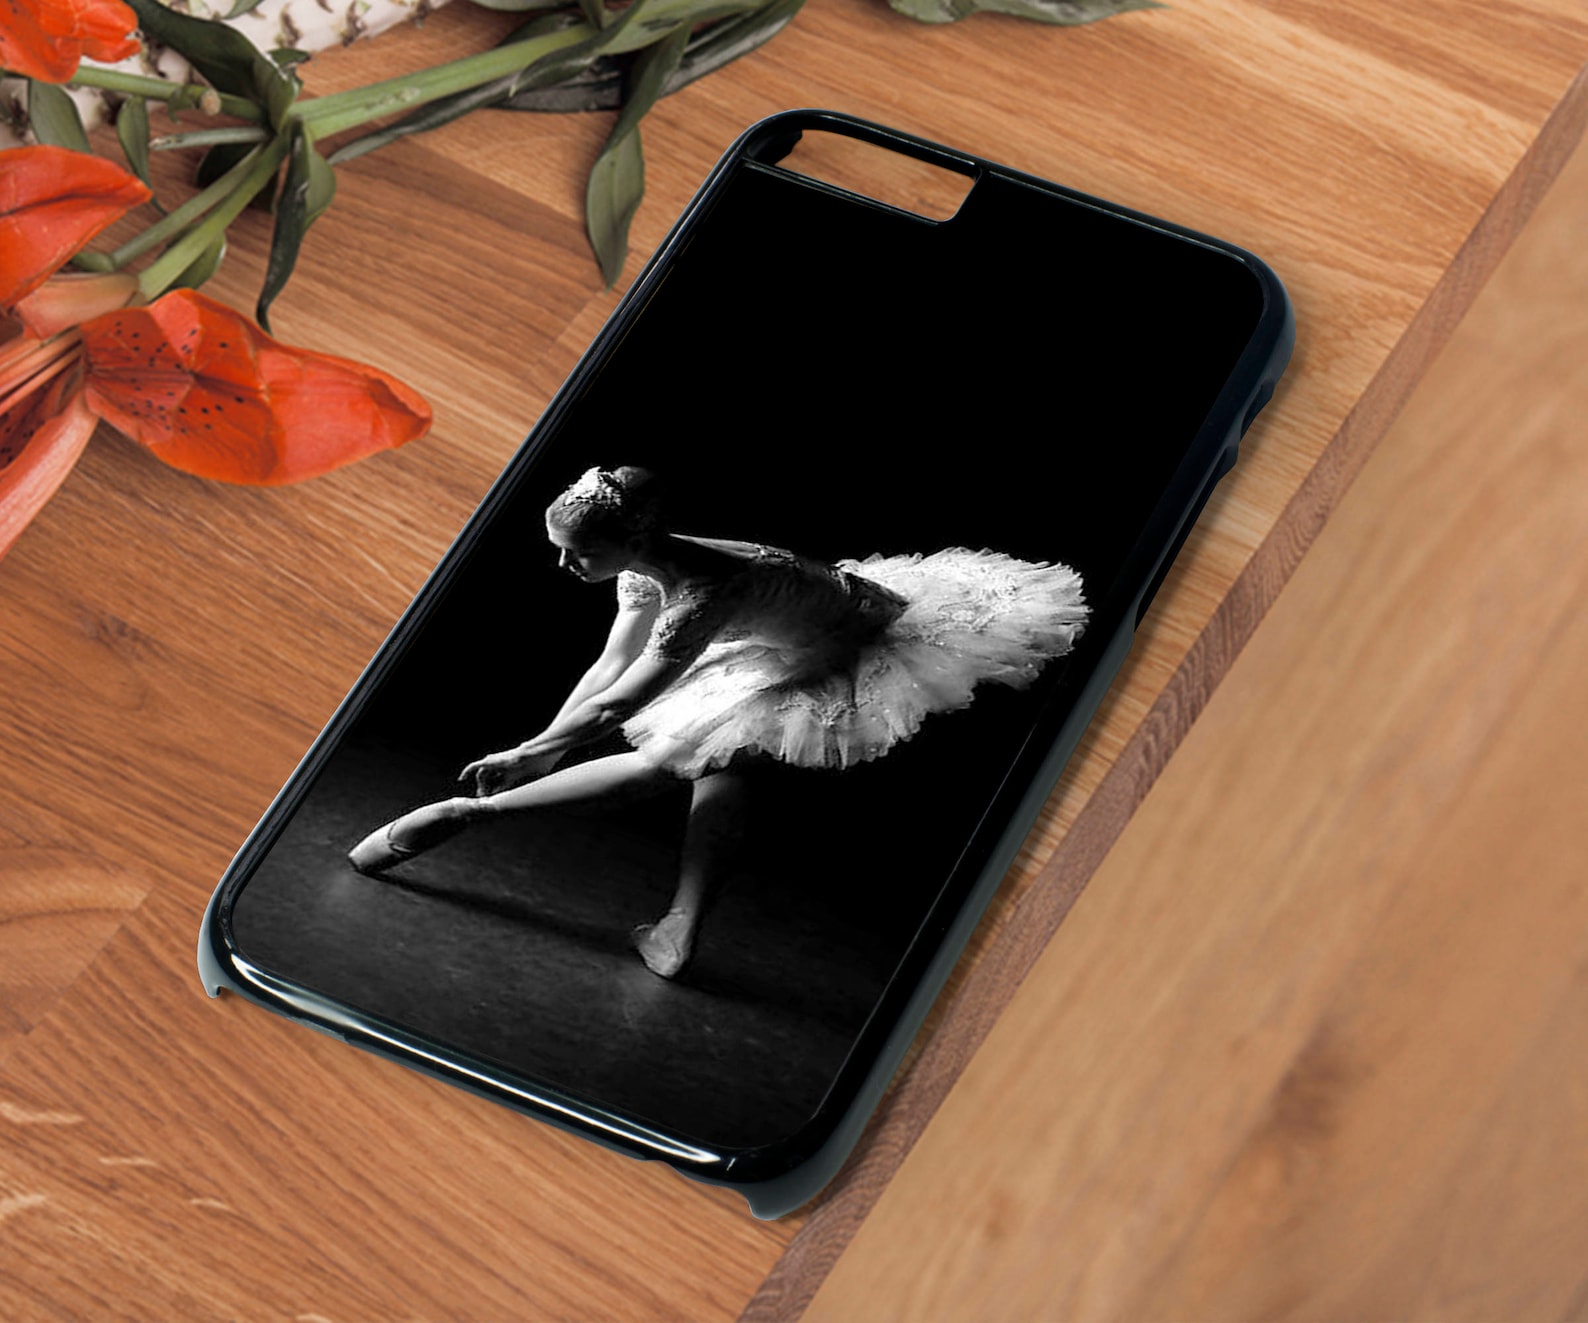 ballerina ballet shoes dress 2 hard phone case cover for iphone